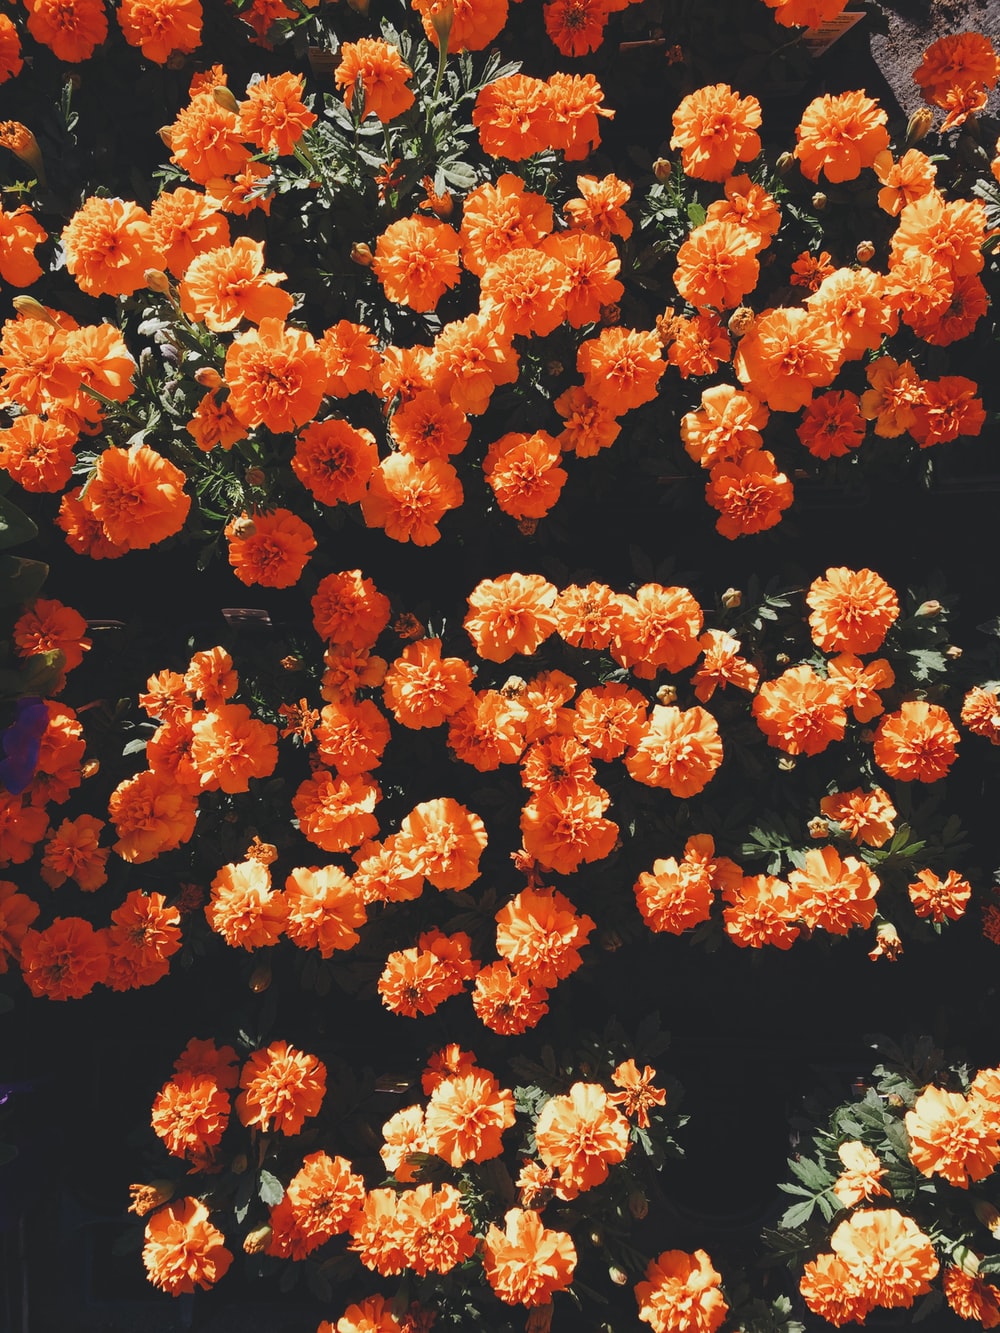 Free download 550 Orange Flower Pictures Download Free Images on ...